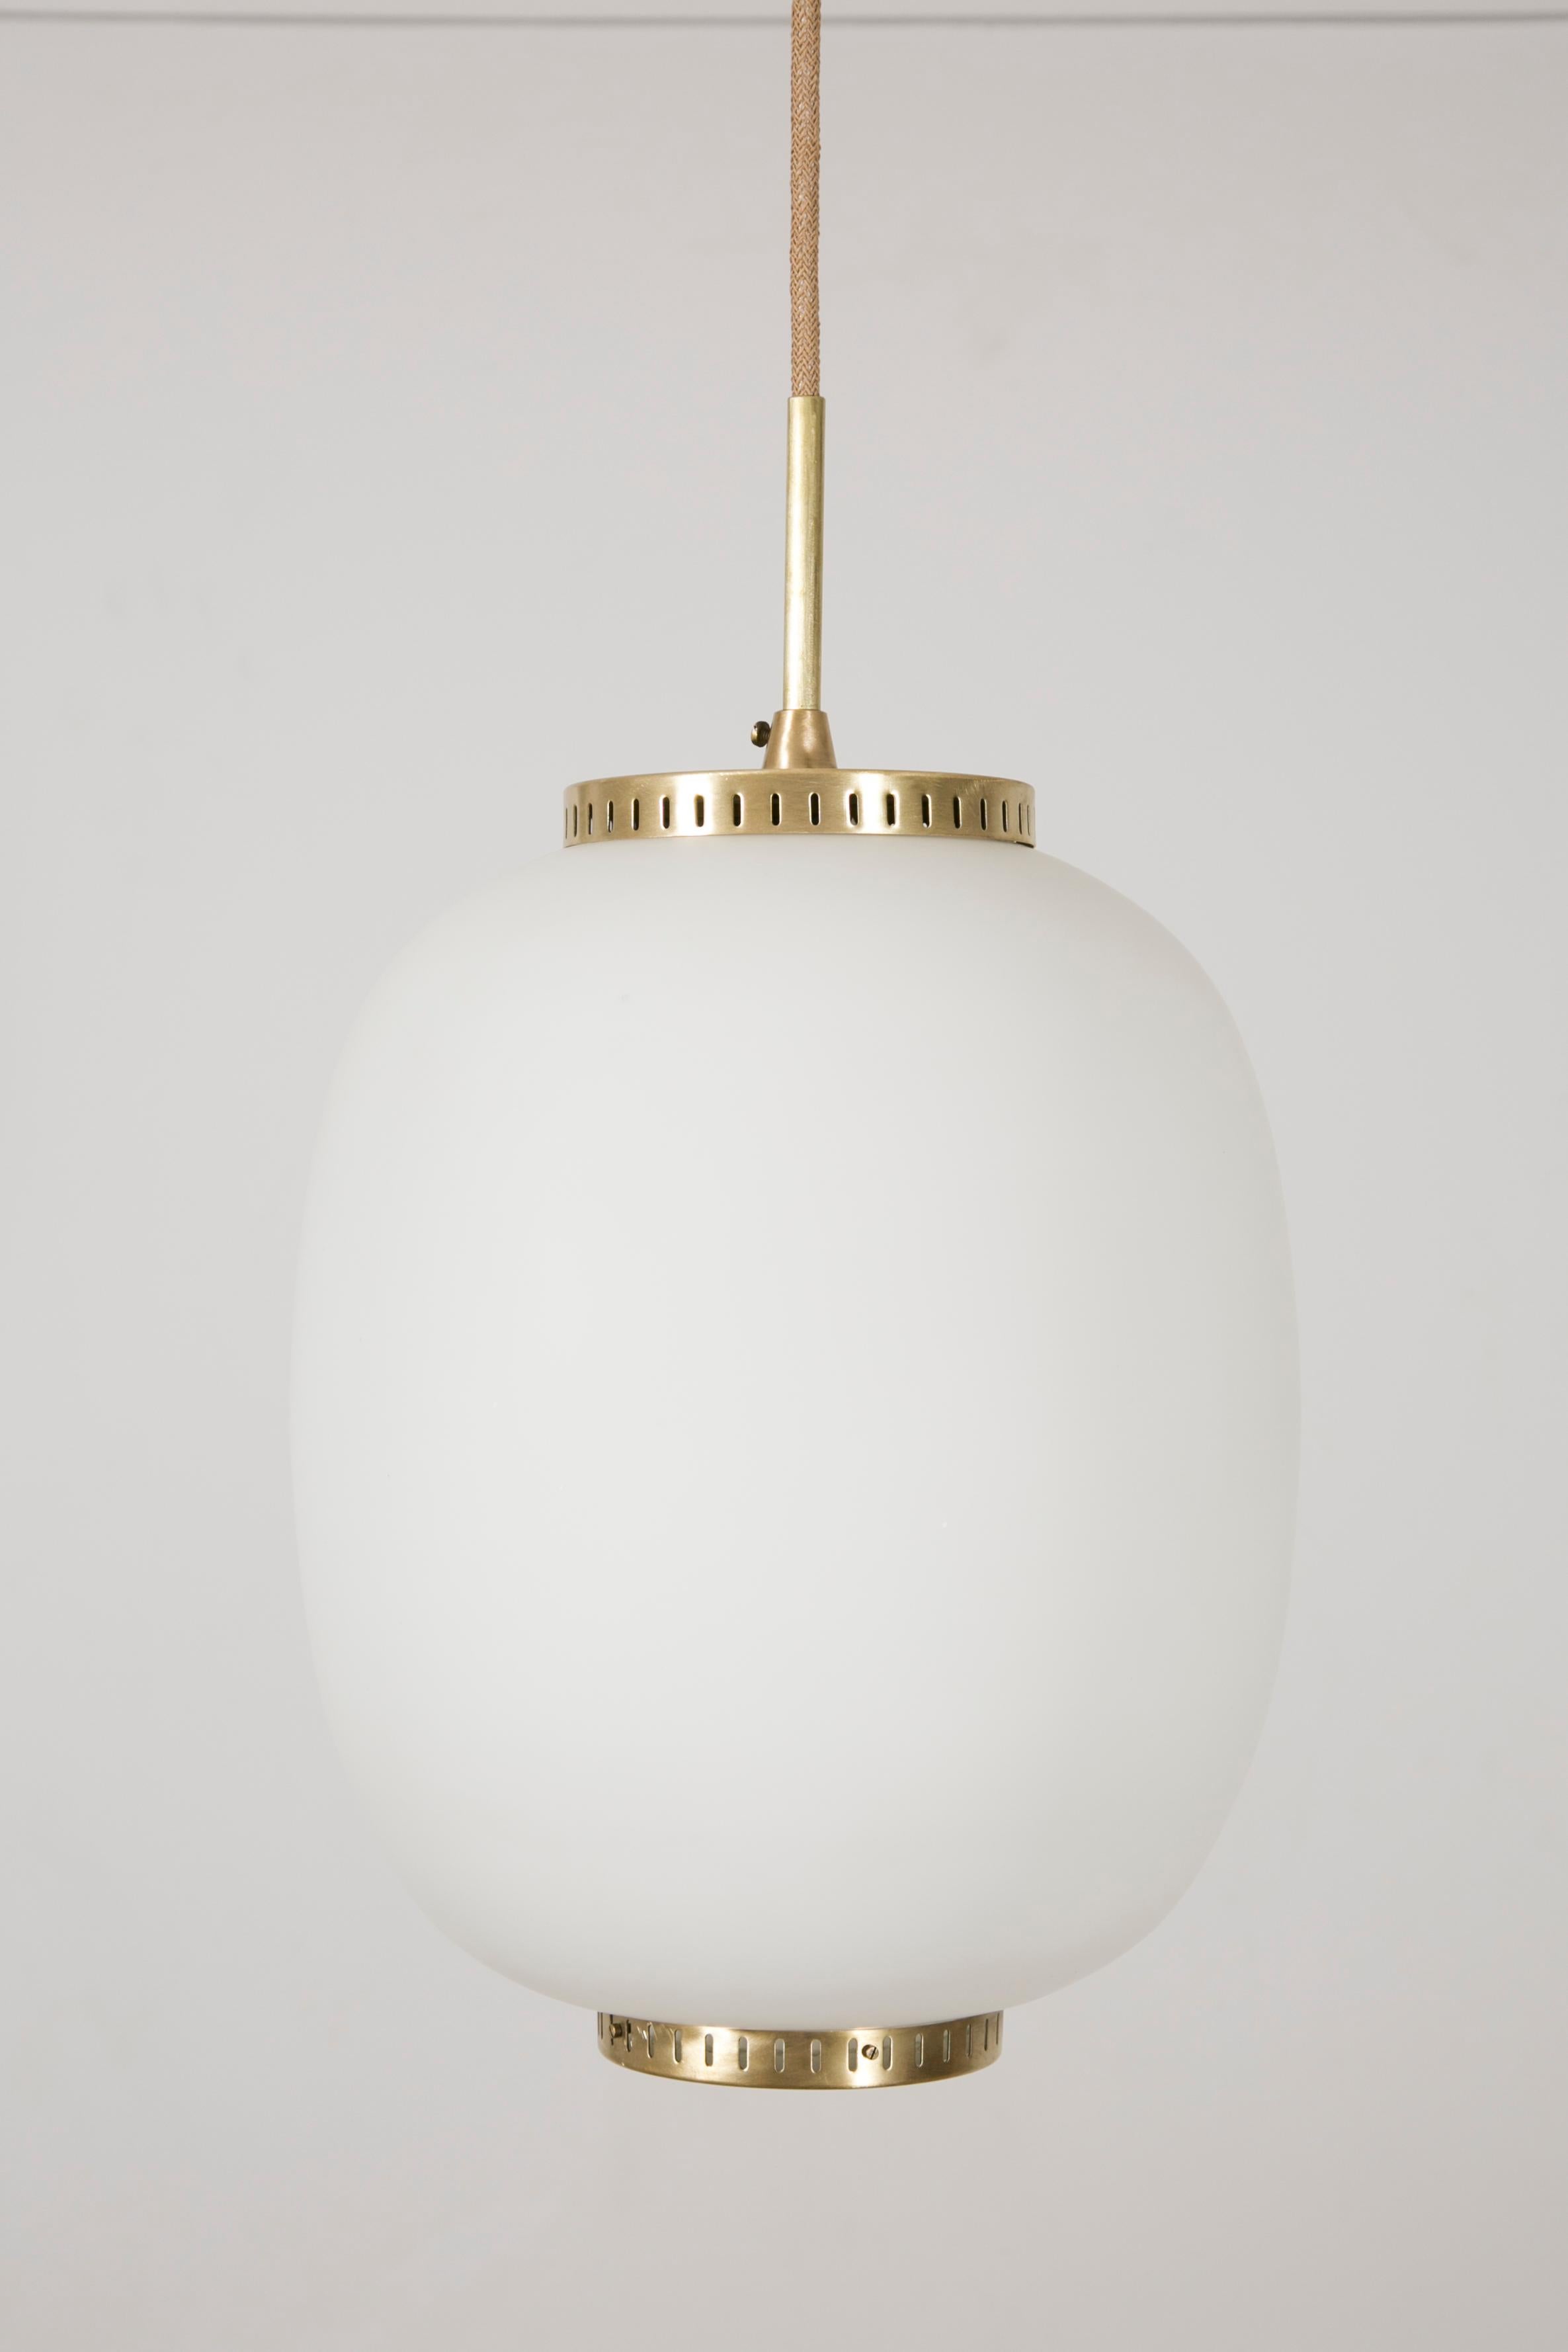 Collection of 8 Opaline Glass and Brass Ceiling Fixtures, Bent Karlby for Lyfa 7